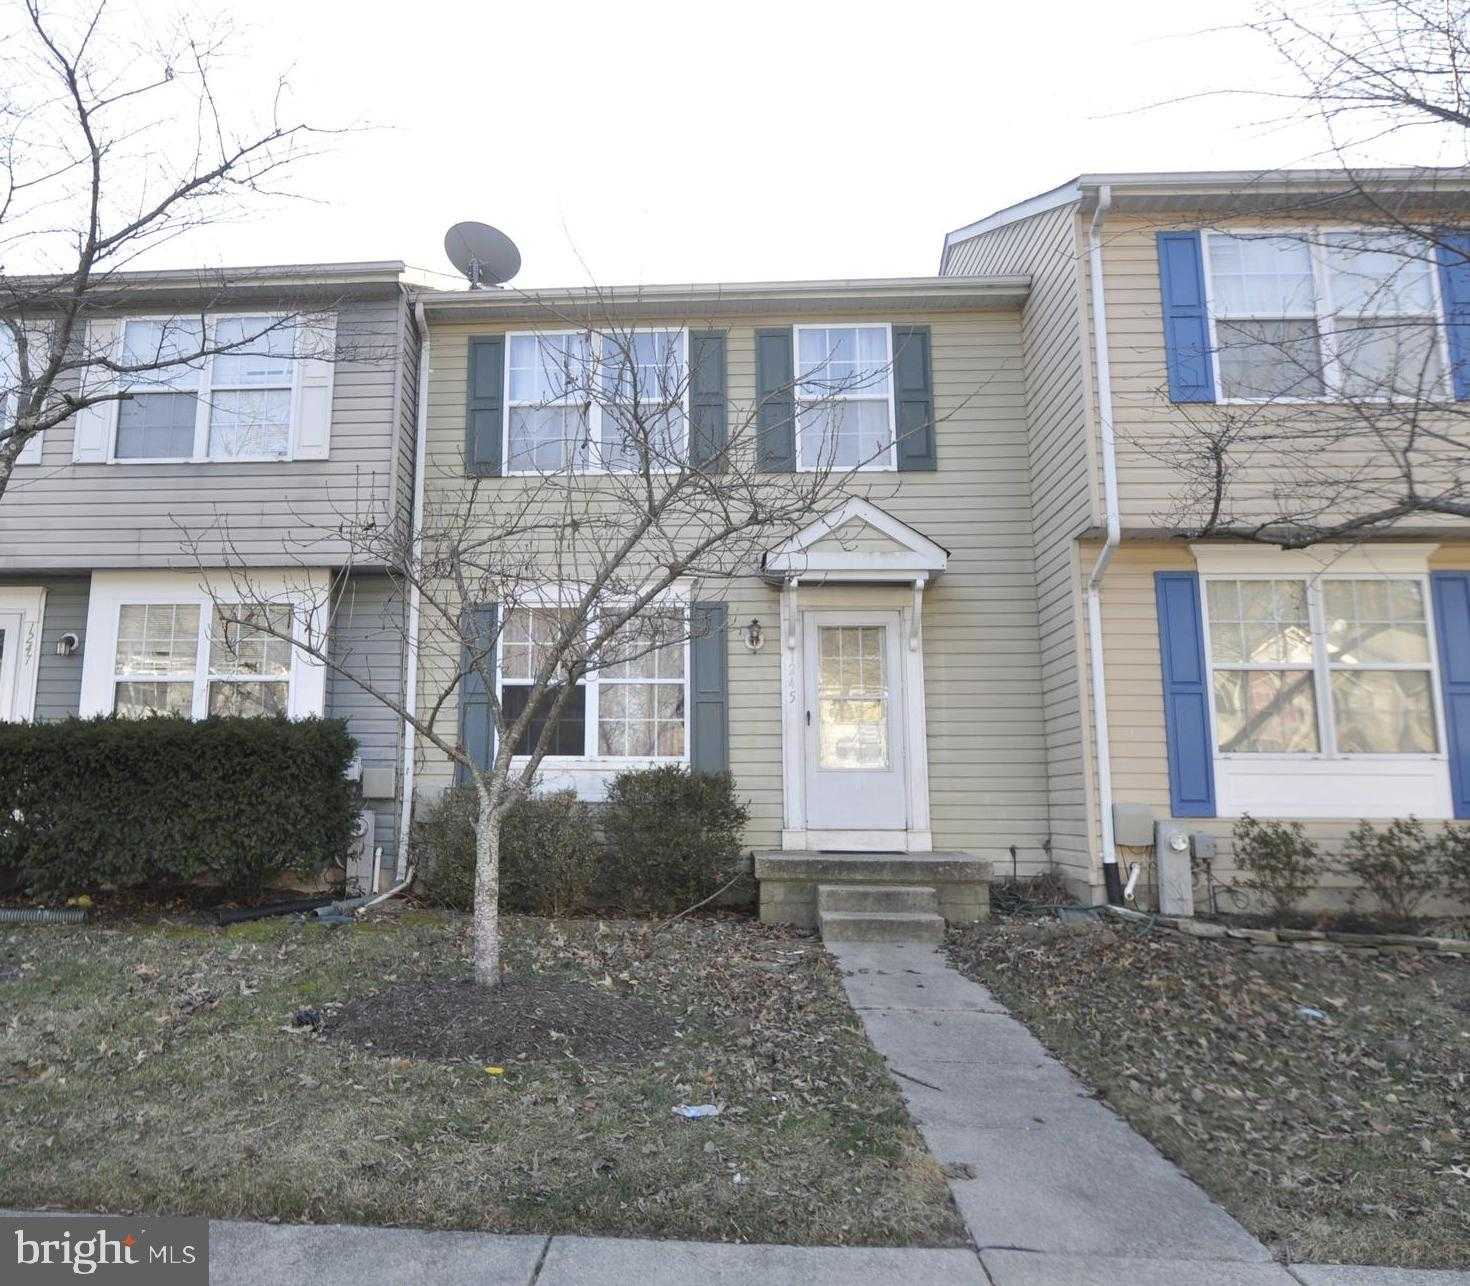 View PASADENA, MD 21122 townhome